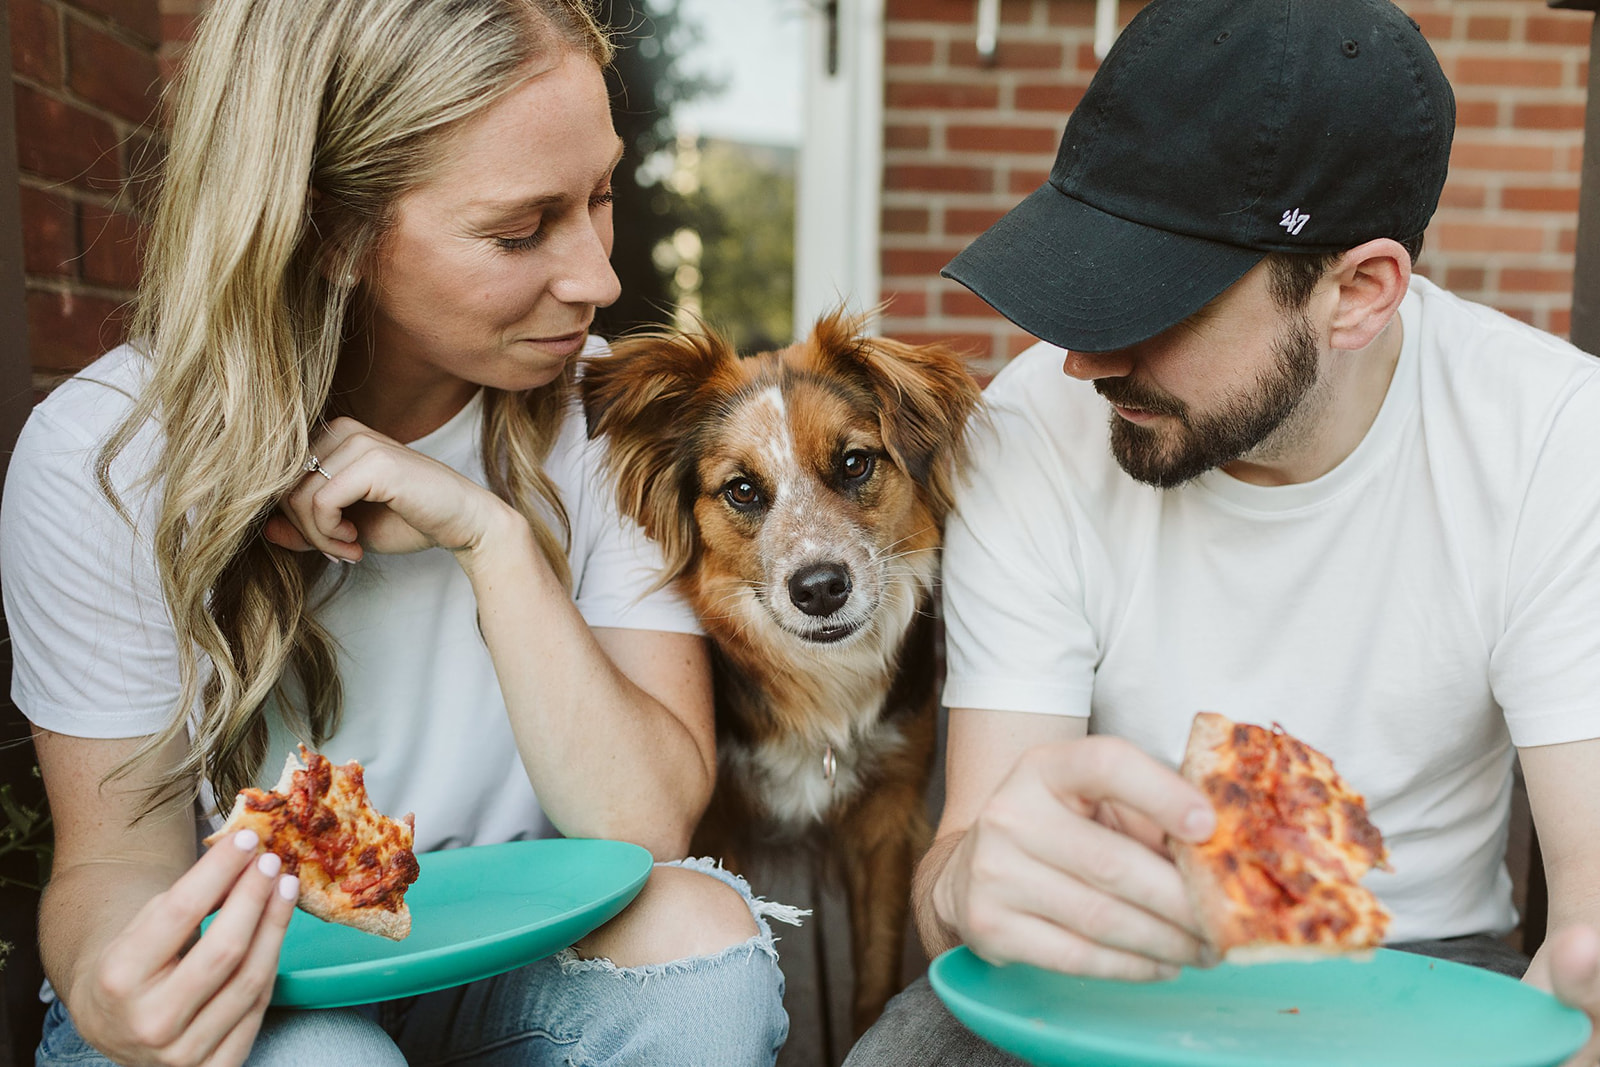 Pizza night for this couple who had their engagement session at home with their dog